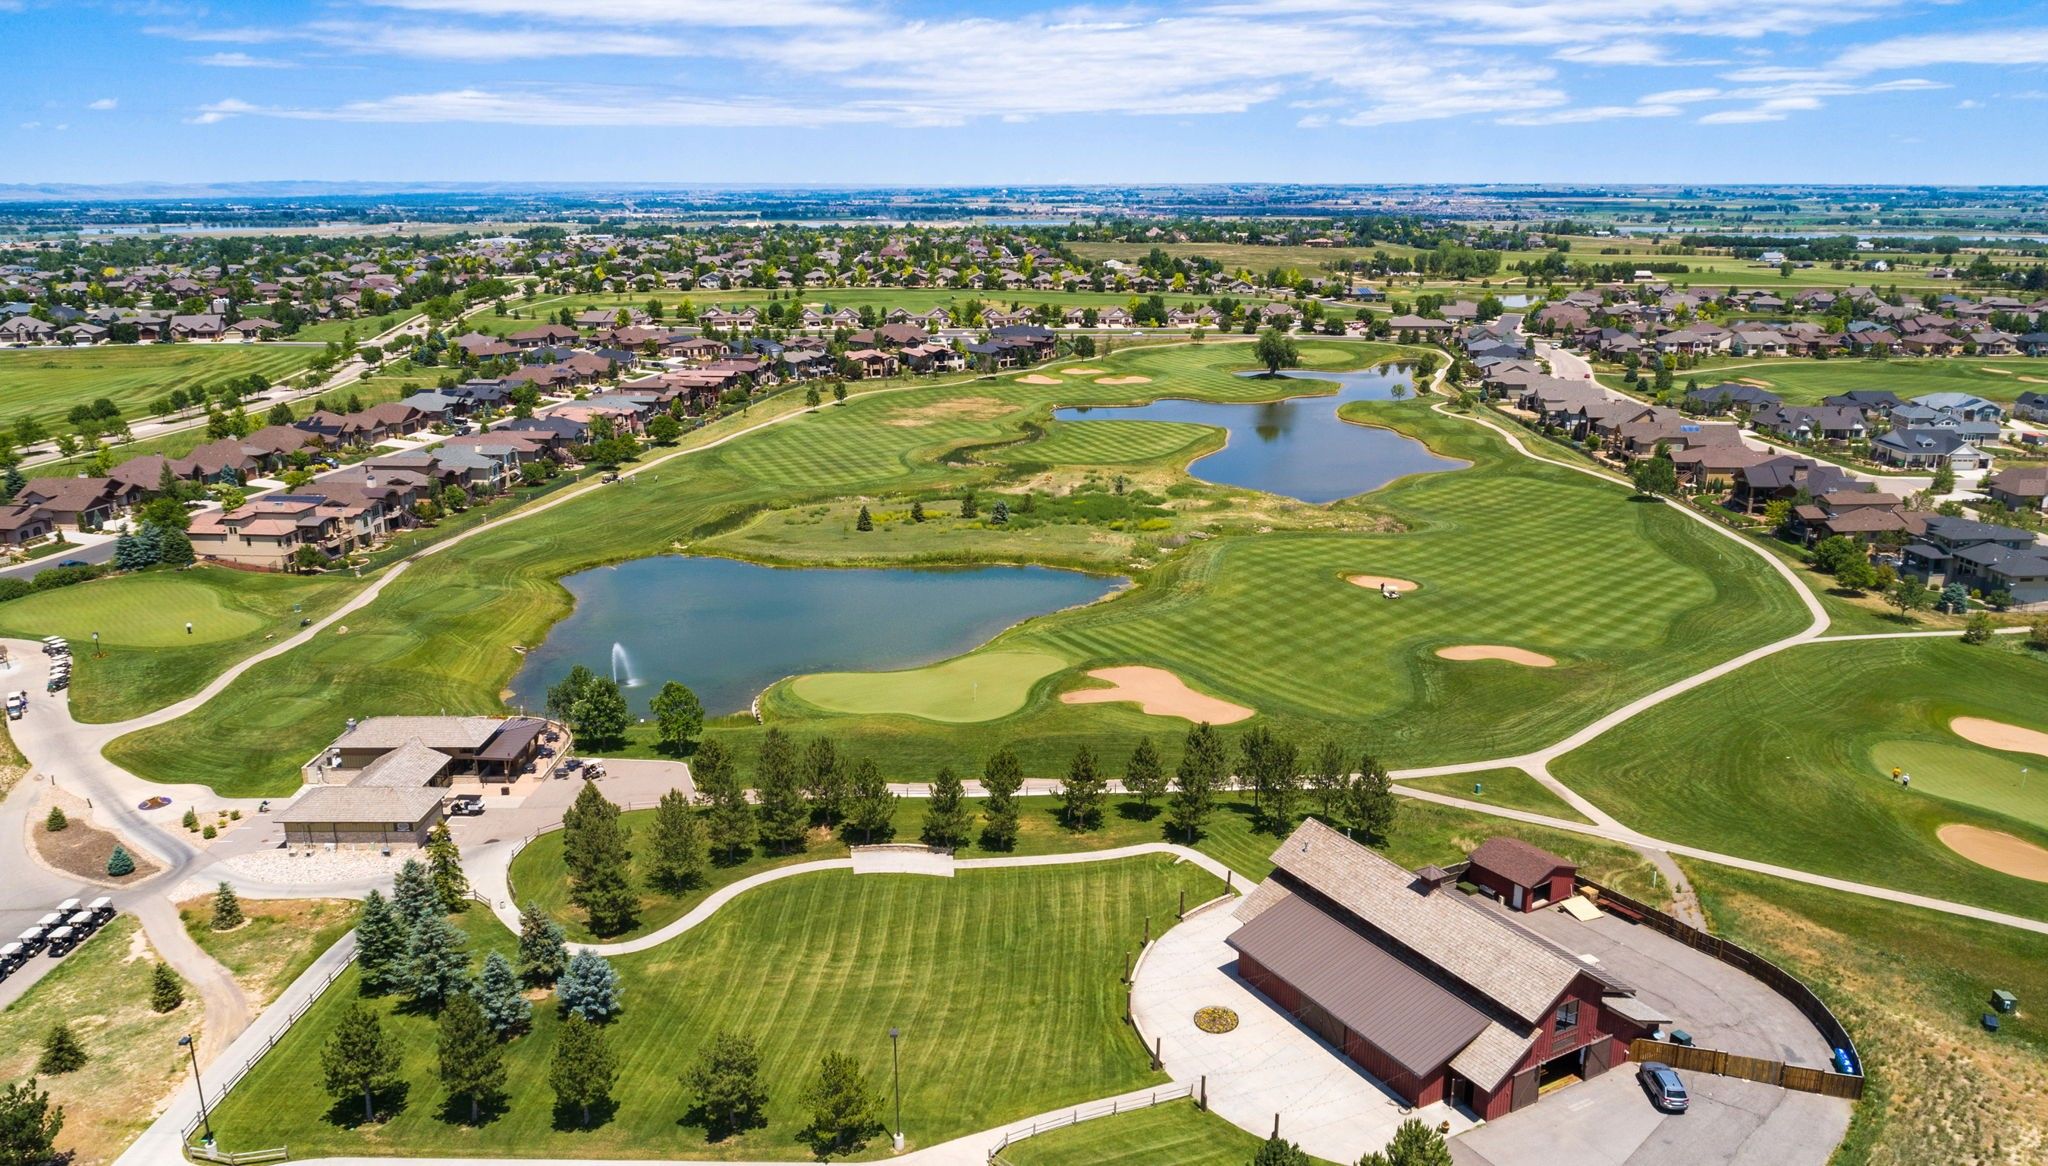 Highland Meadows Golf Course is widely acclaimed as the best conditioned public golf course in Northern Colorado.